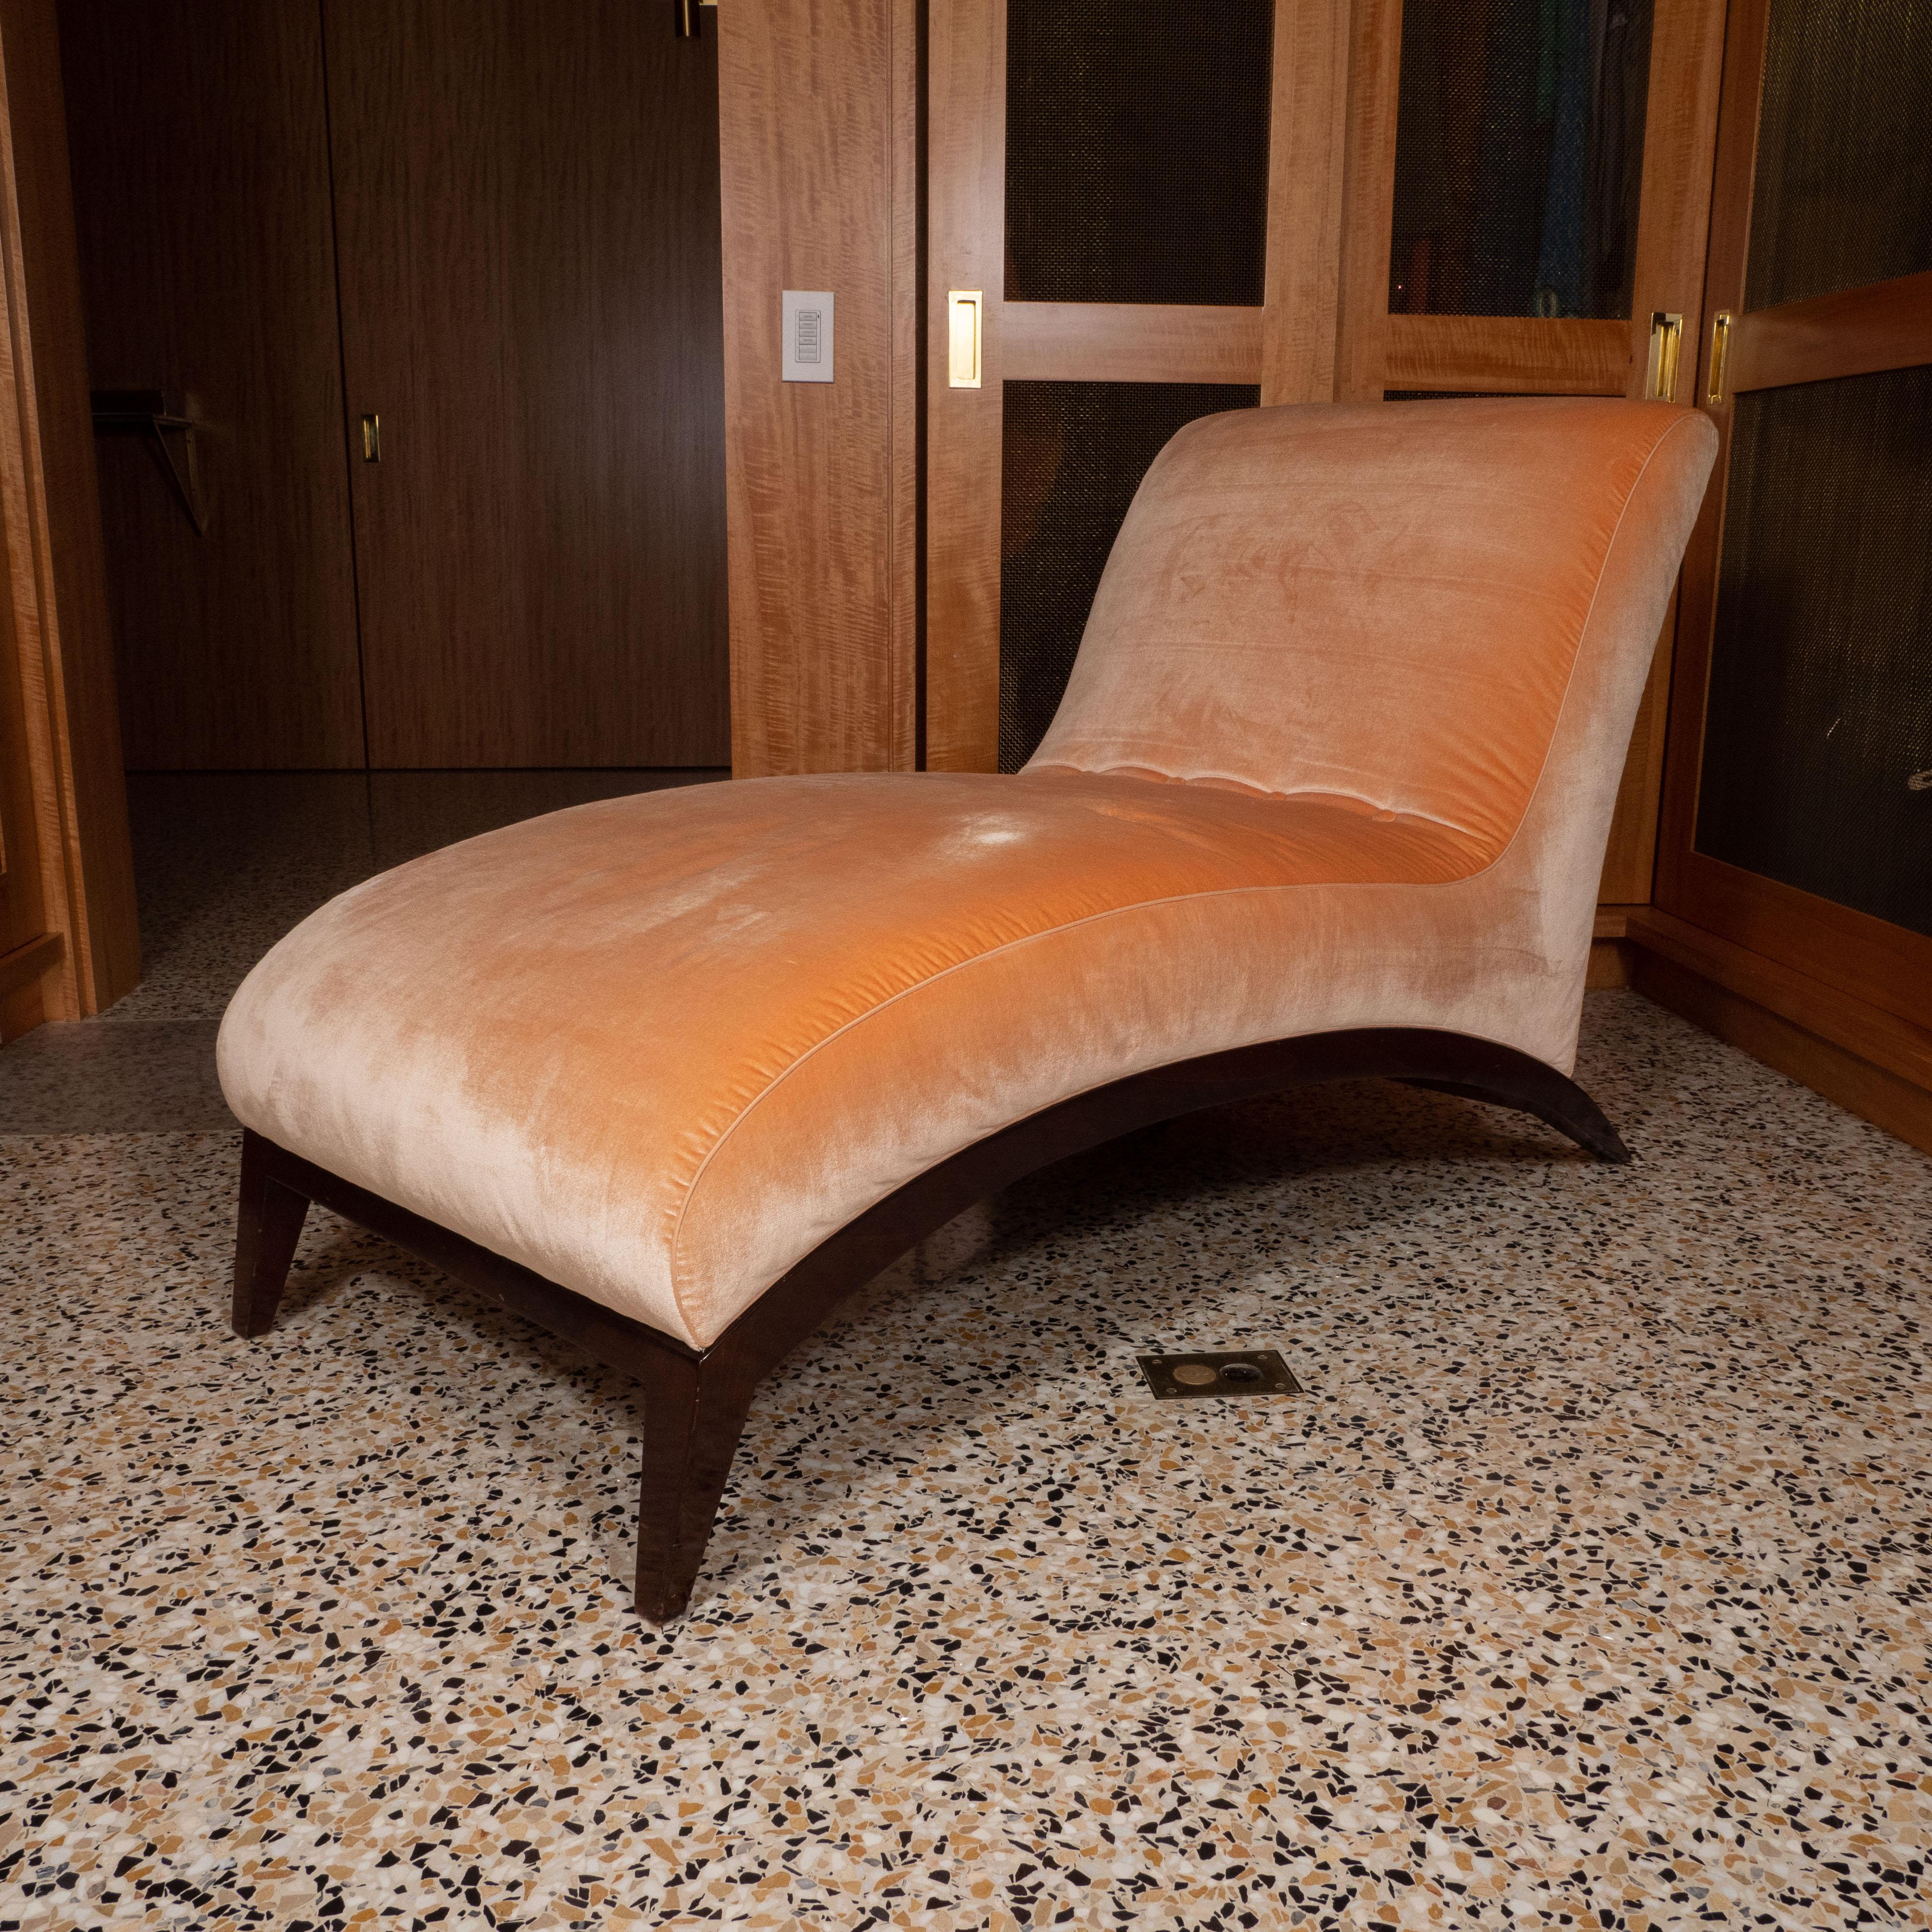 Art Deco chaise lounge with tight seat back and wood legs, USA, circa 1930-1940.

Reupholstered in pink mohair in 2012.